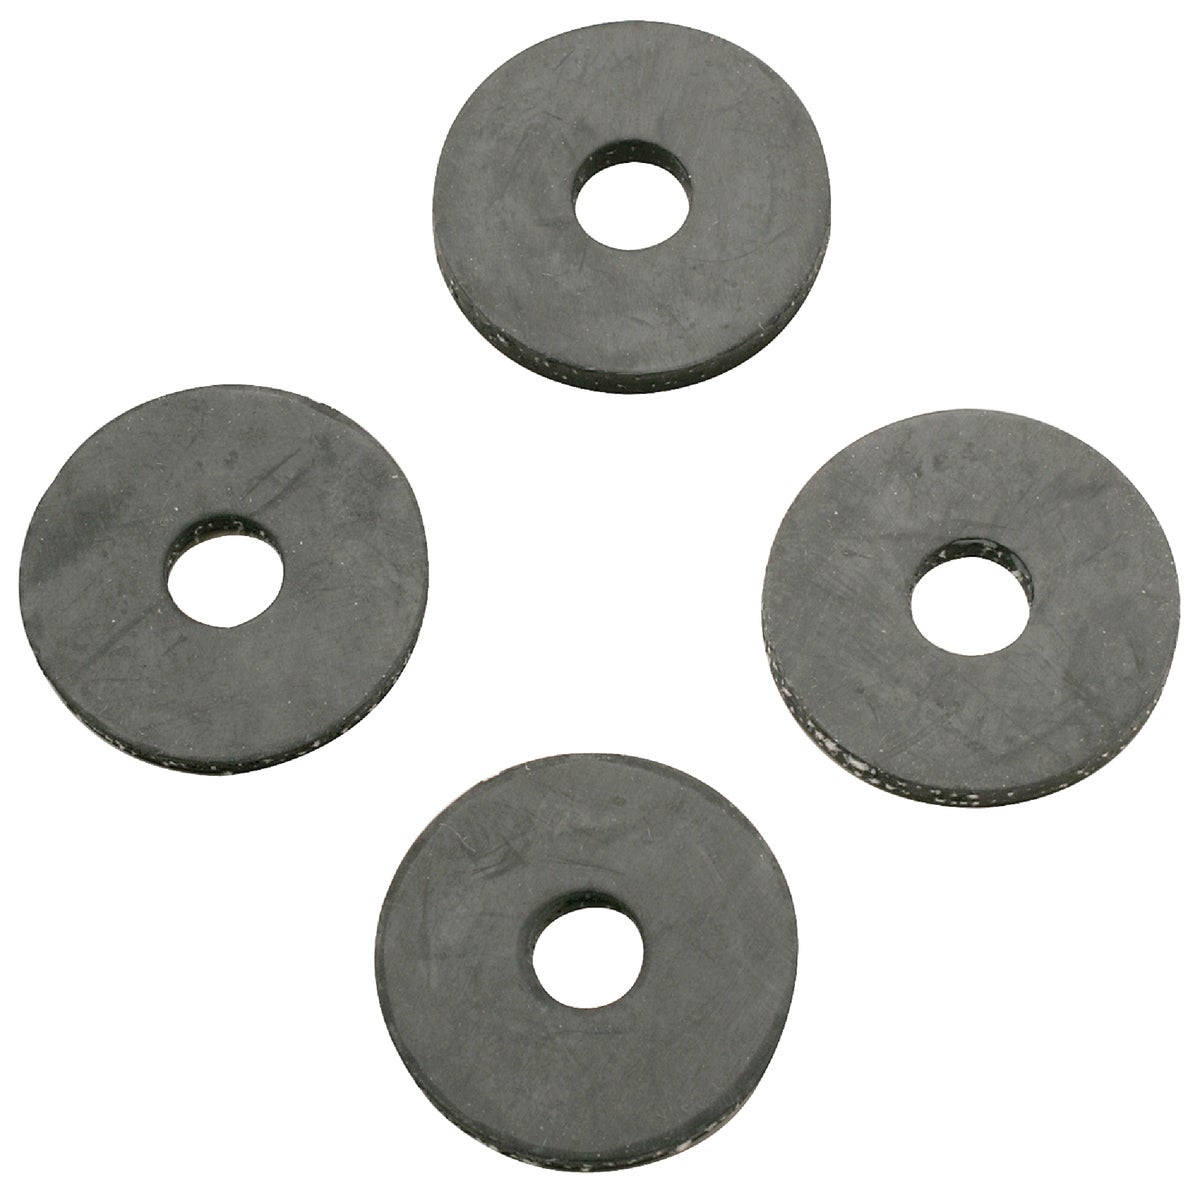 Item 411842, Tank bolt cloth inserted washers. 1-3/32" O.D. x 15/32" I.D. x 1/8" thick.